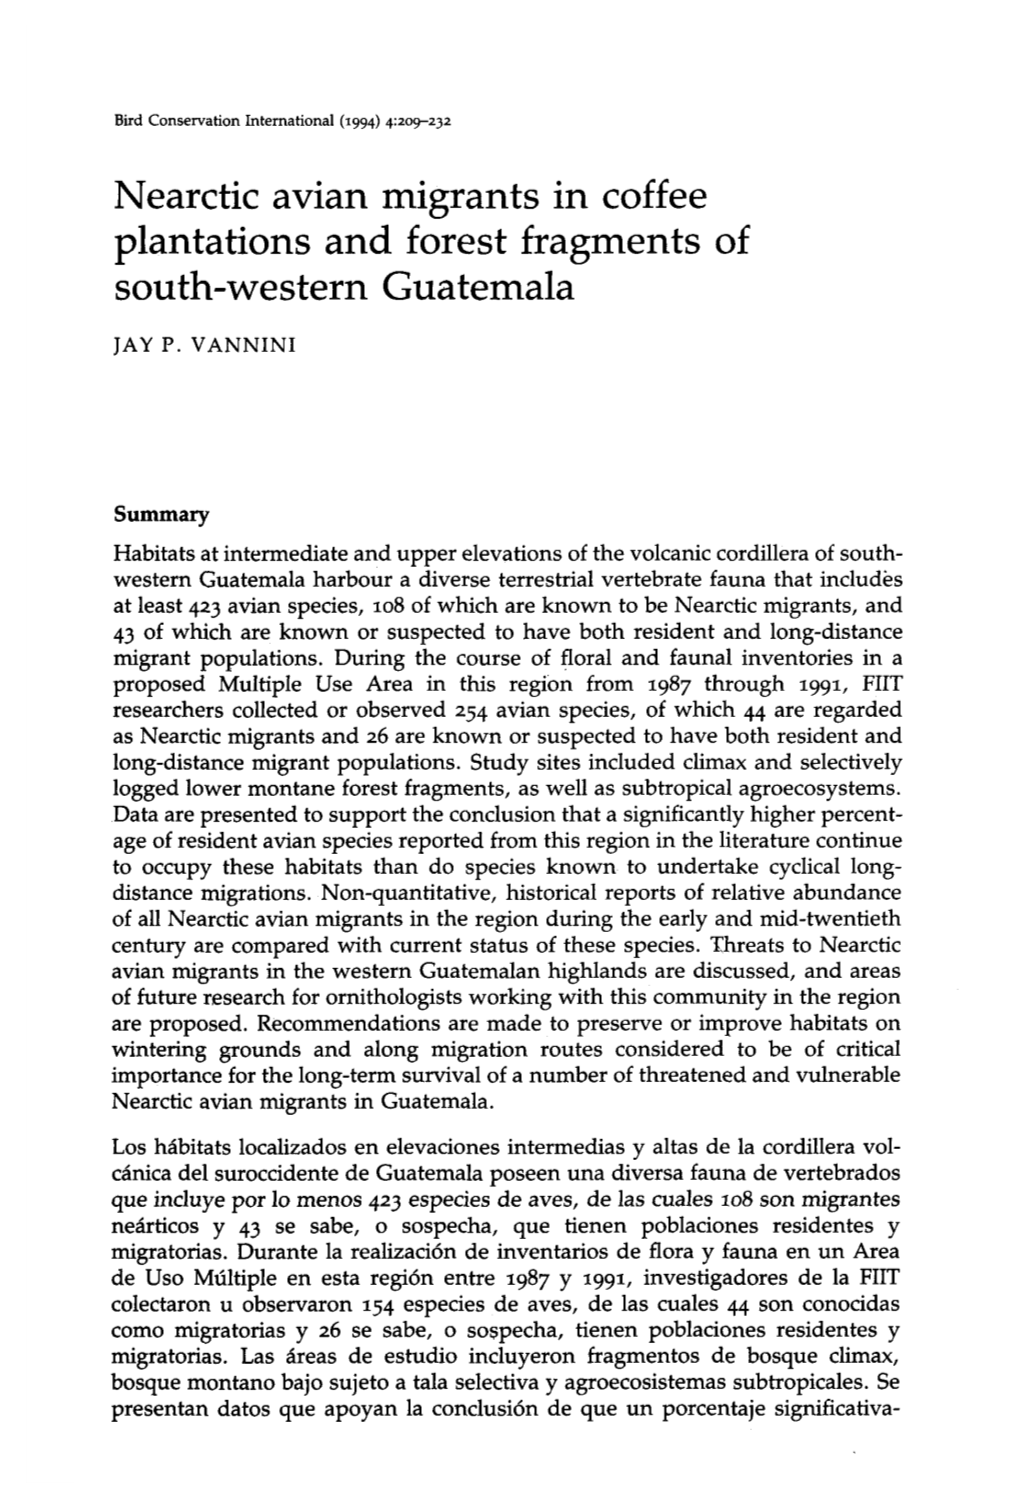 Nearctic Avian Migrants in Coffee Plantations and Forest Fragments of South-Western Guatemala